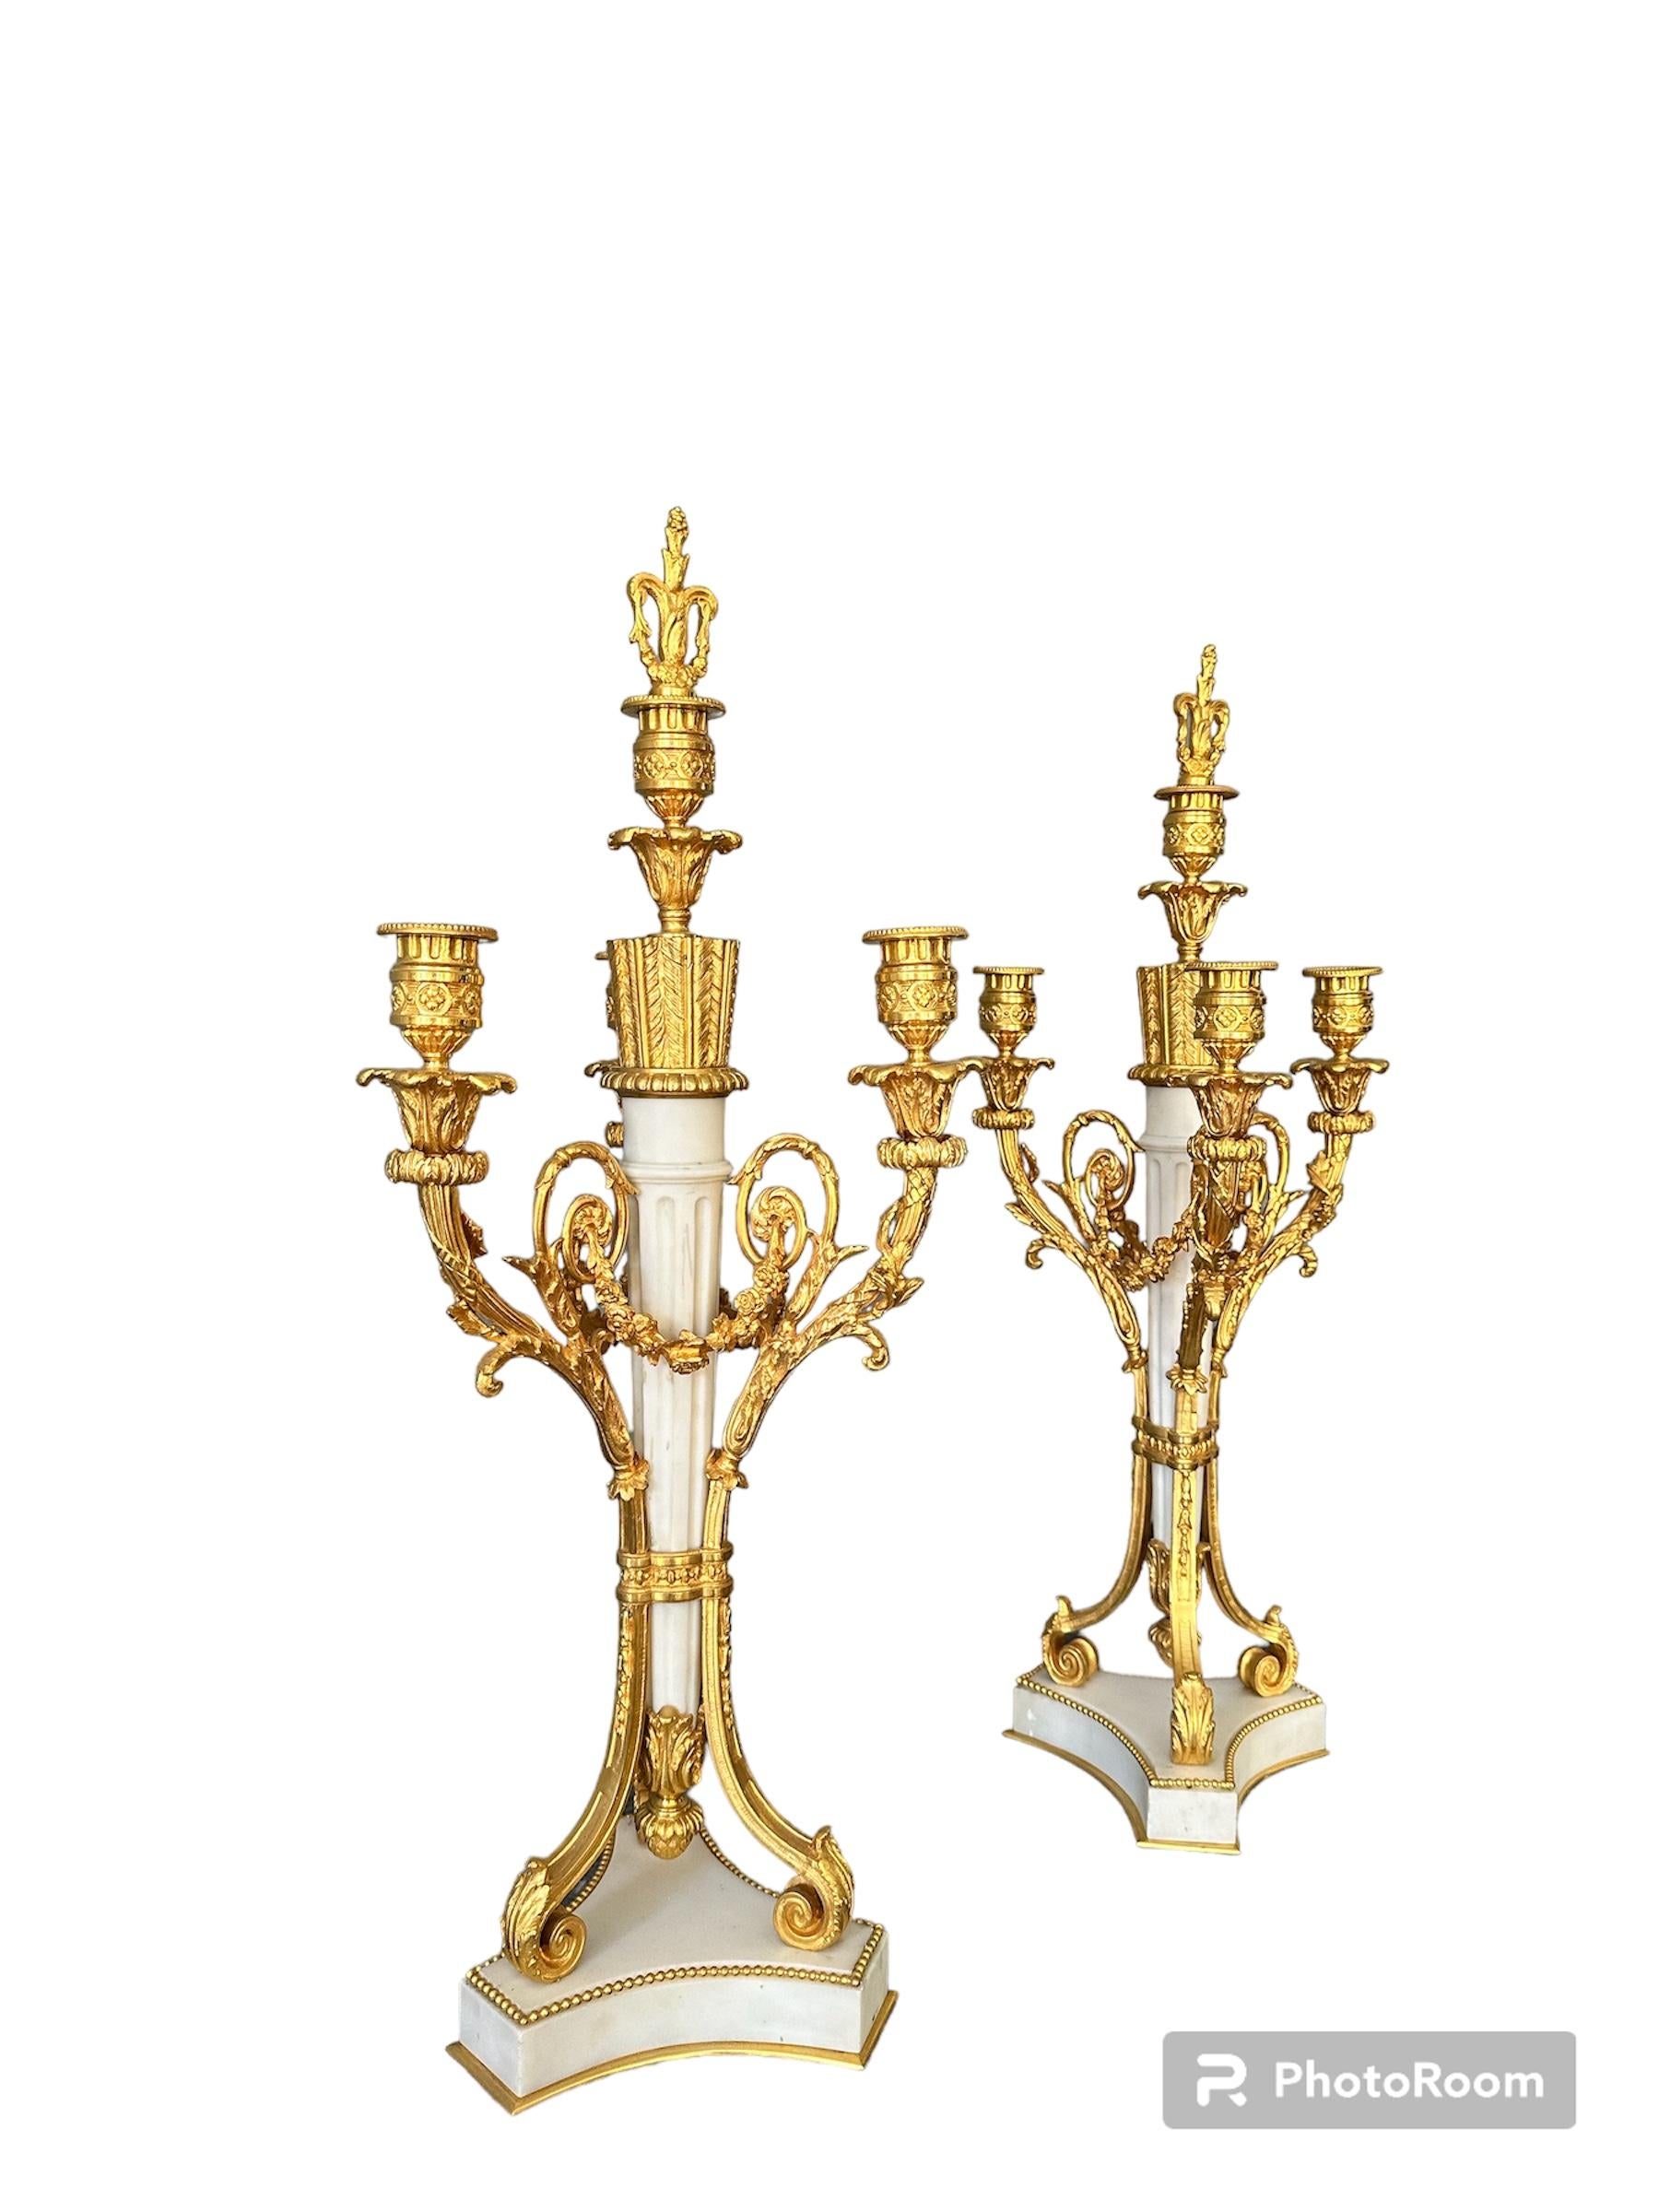 Elegant pair of three-armed candlesticks made of white Carrara marble and finely chiseled and gilded bronze.

Francis - 19th century 

Measurements: H 65